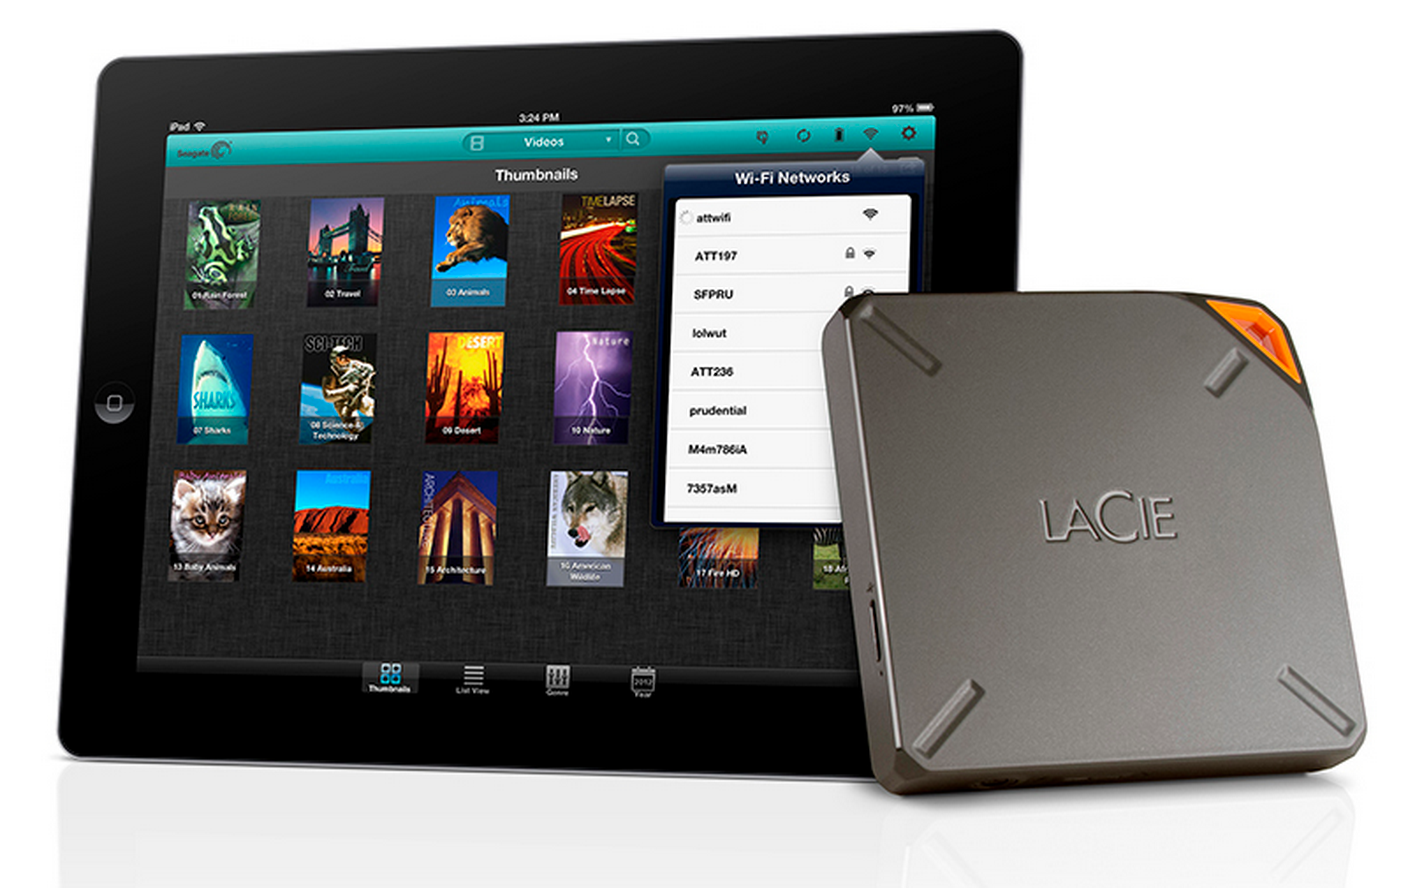 lacie bumps up the speed with thunderbolt 2 drive also unveils 1tb drive for ios devices image 2